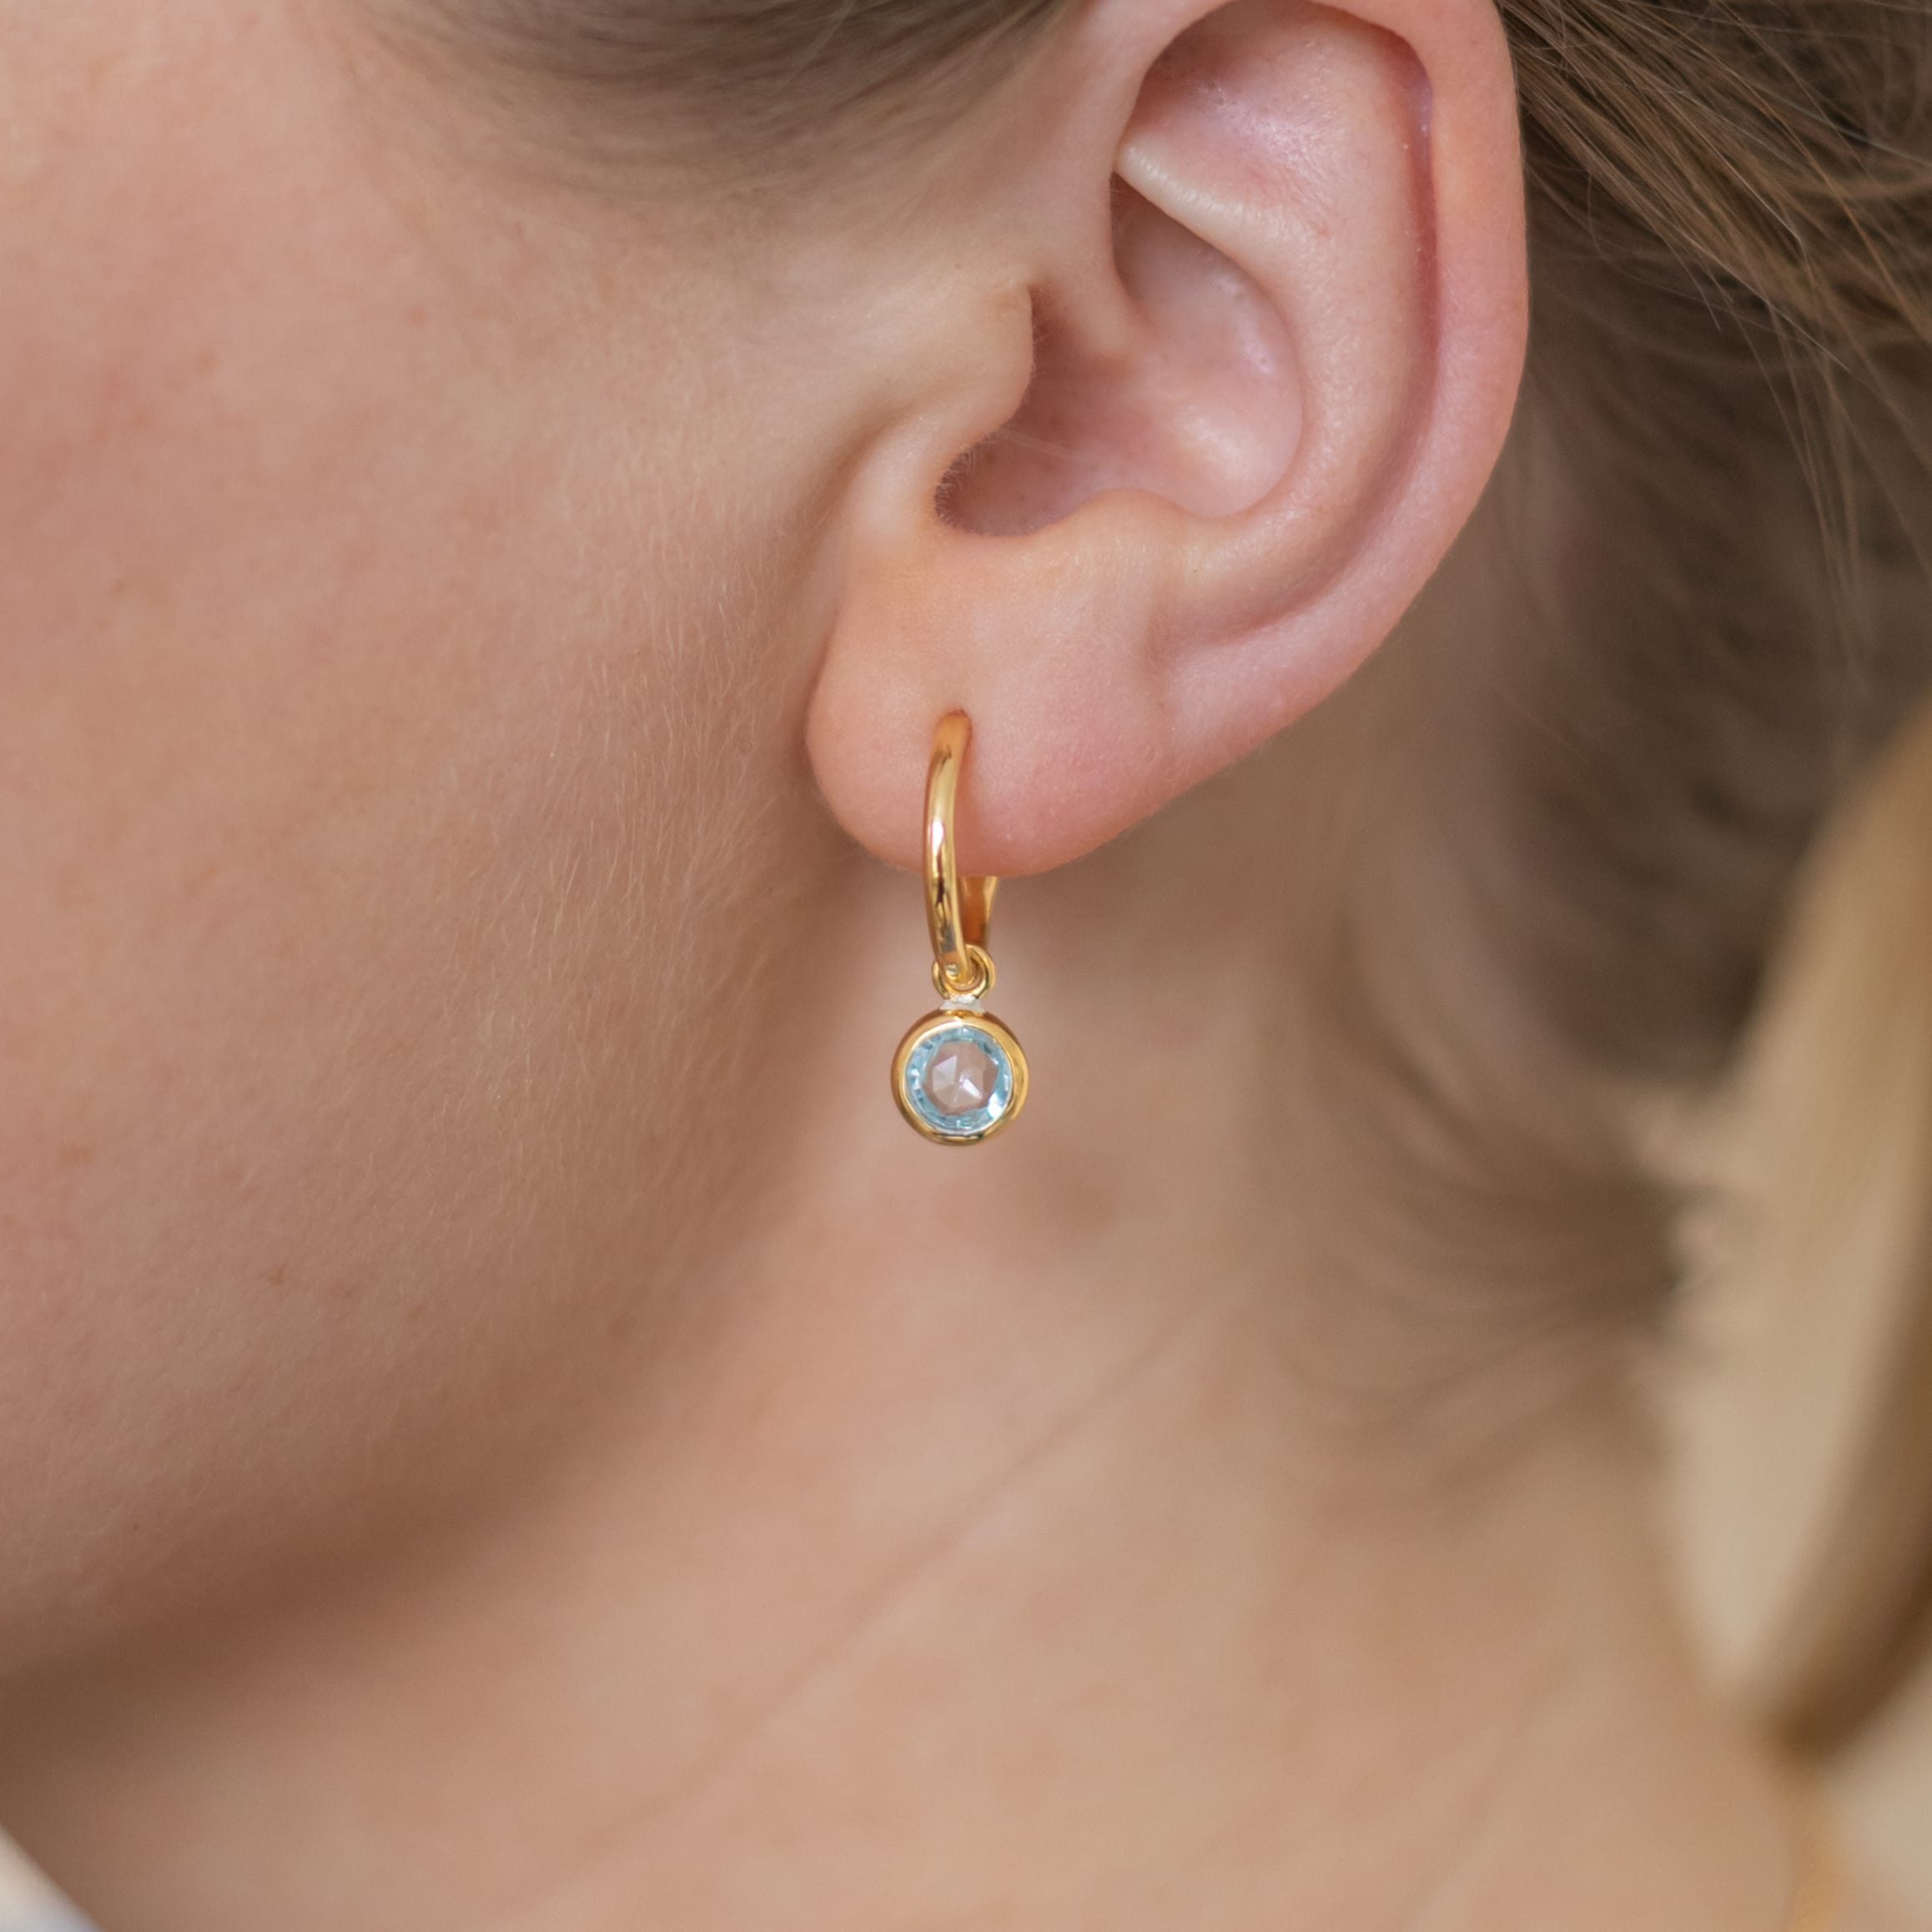 November Birthstone Gold Hoop Earrings - Citrine (Charm sold with hoops or individually)